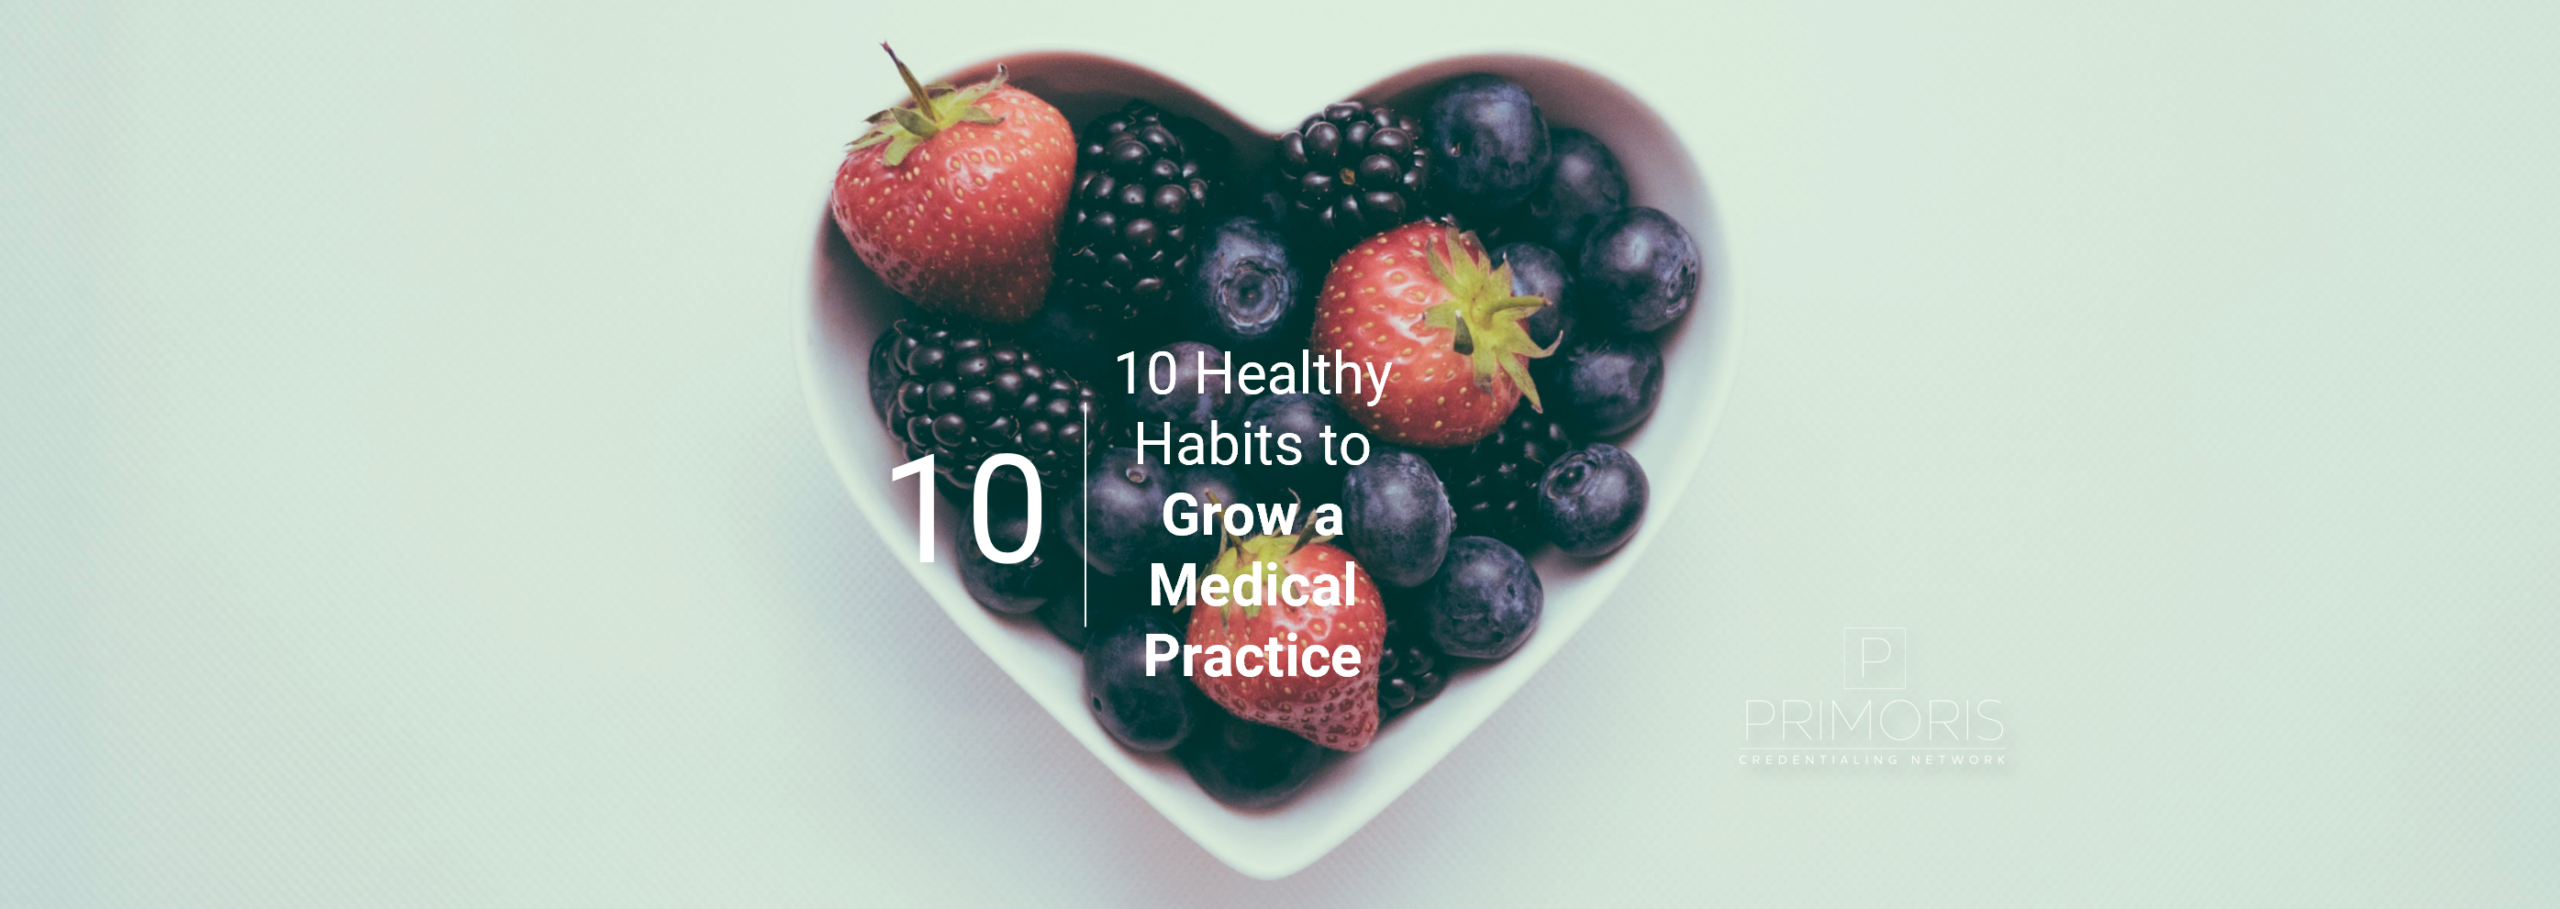 Healthy Habits To Grow A Medical Practice